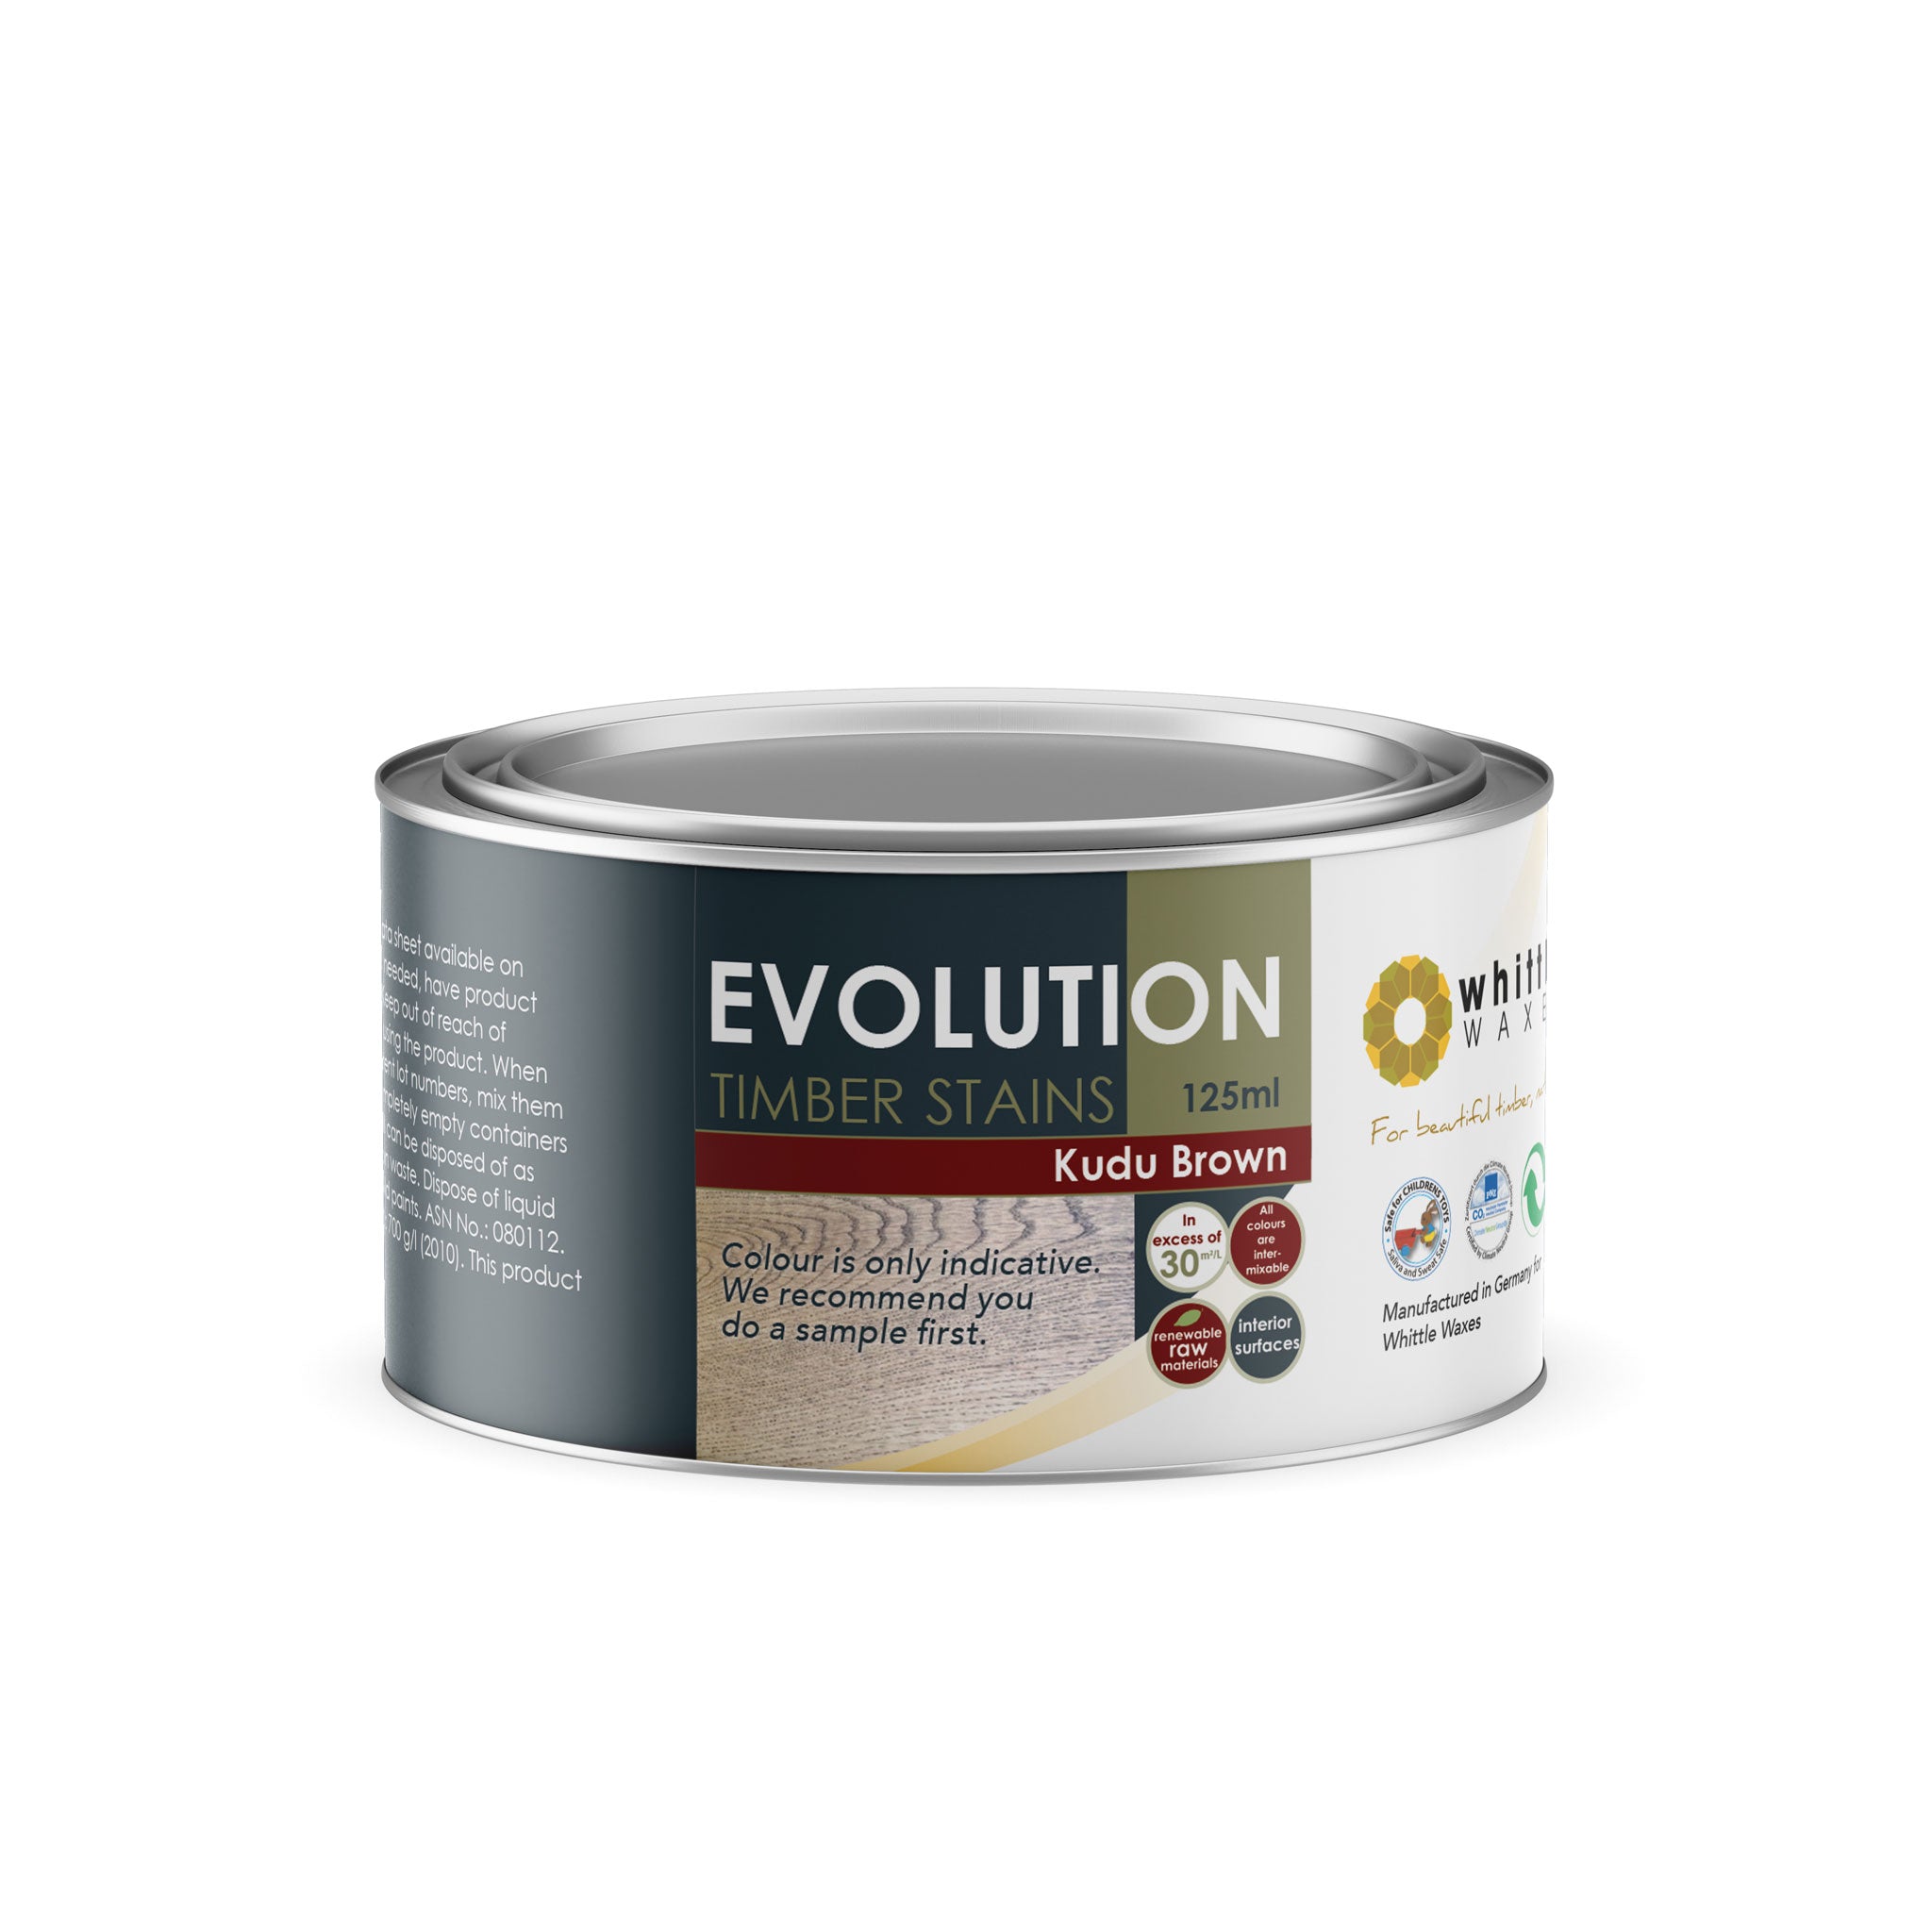 Whittle Waxes Evolution Colours (Kudu Brown) - quality timber stain - 125ml